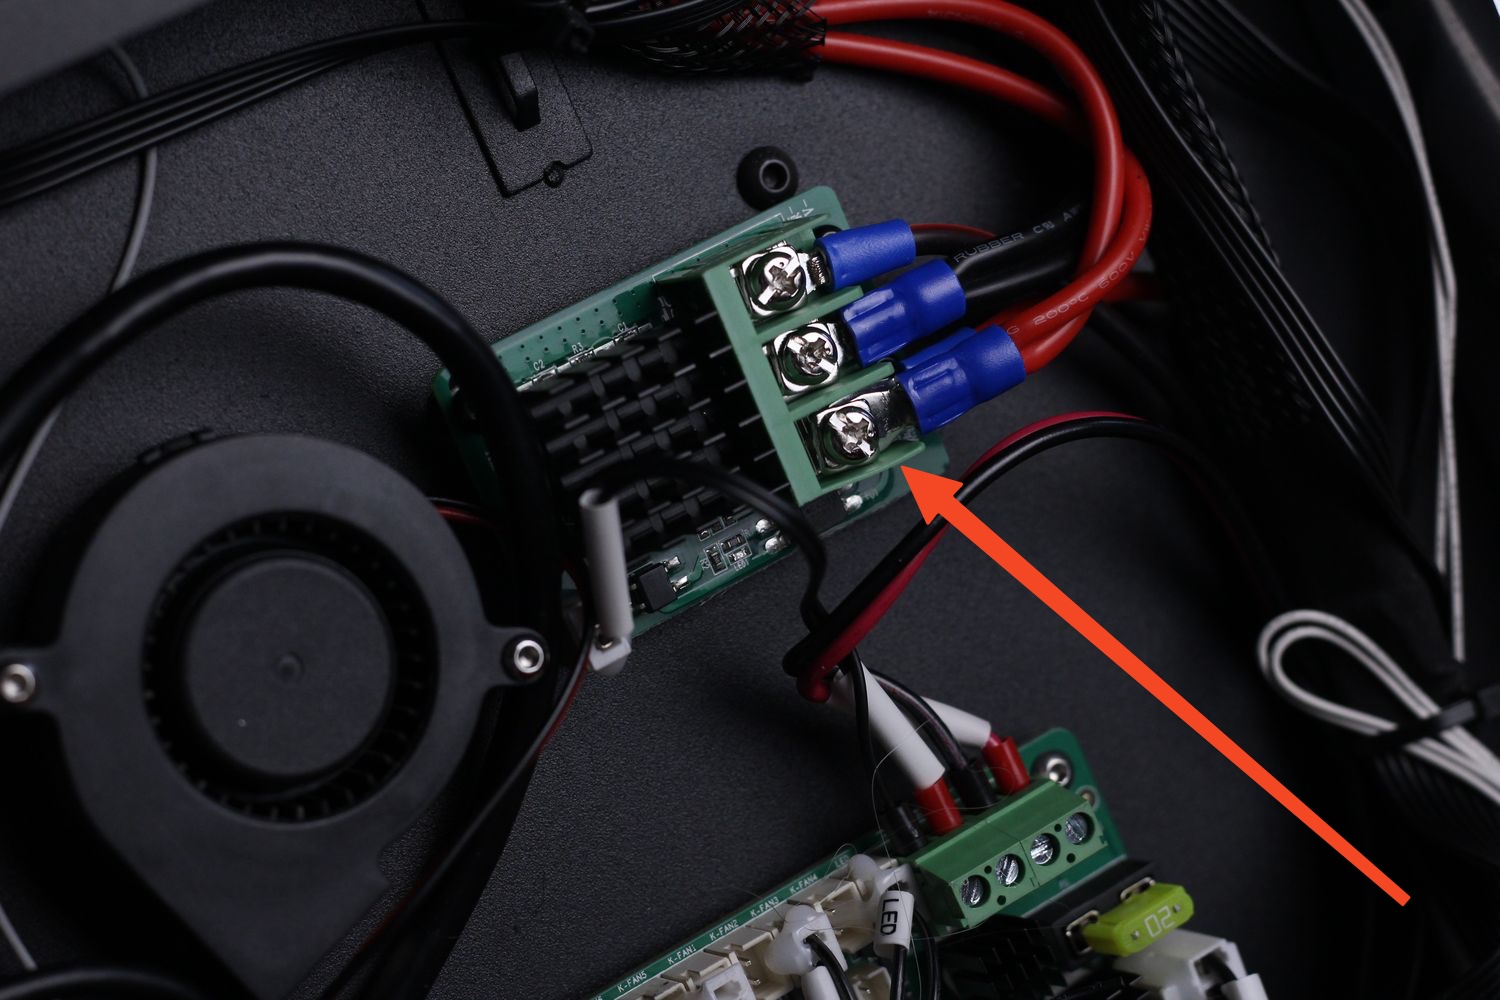 CR M4 Mosfet wires not tightened | Creality CR-M4 Review: Large Format 3D Printer